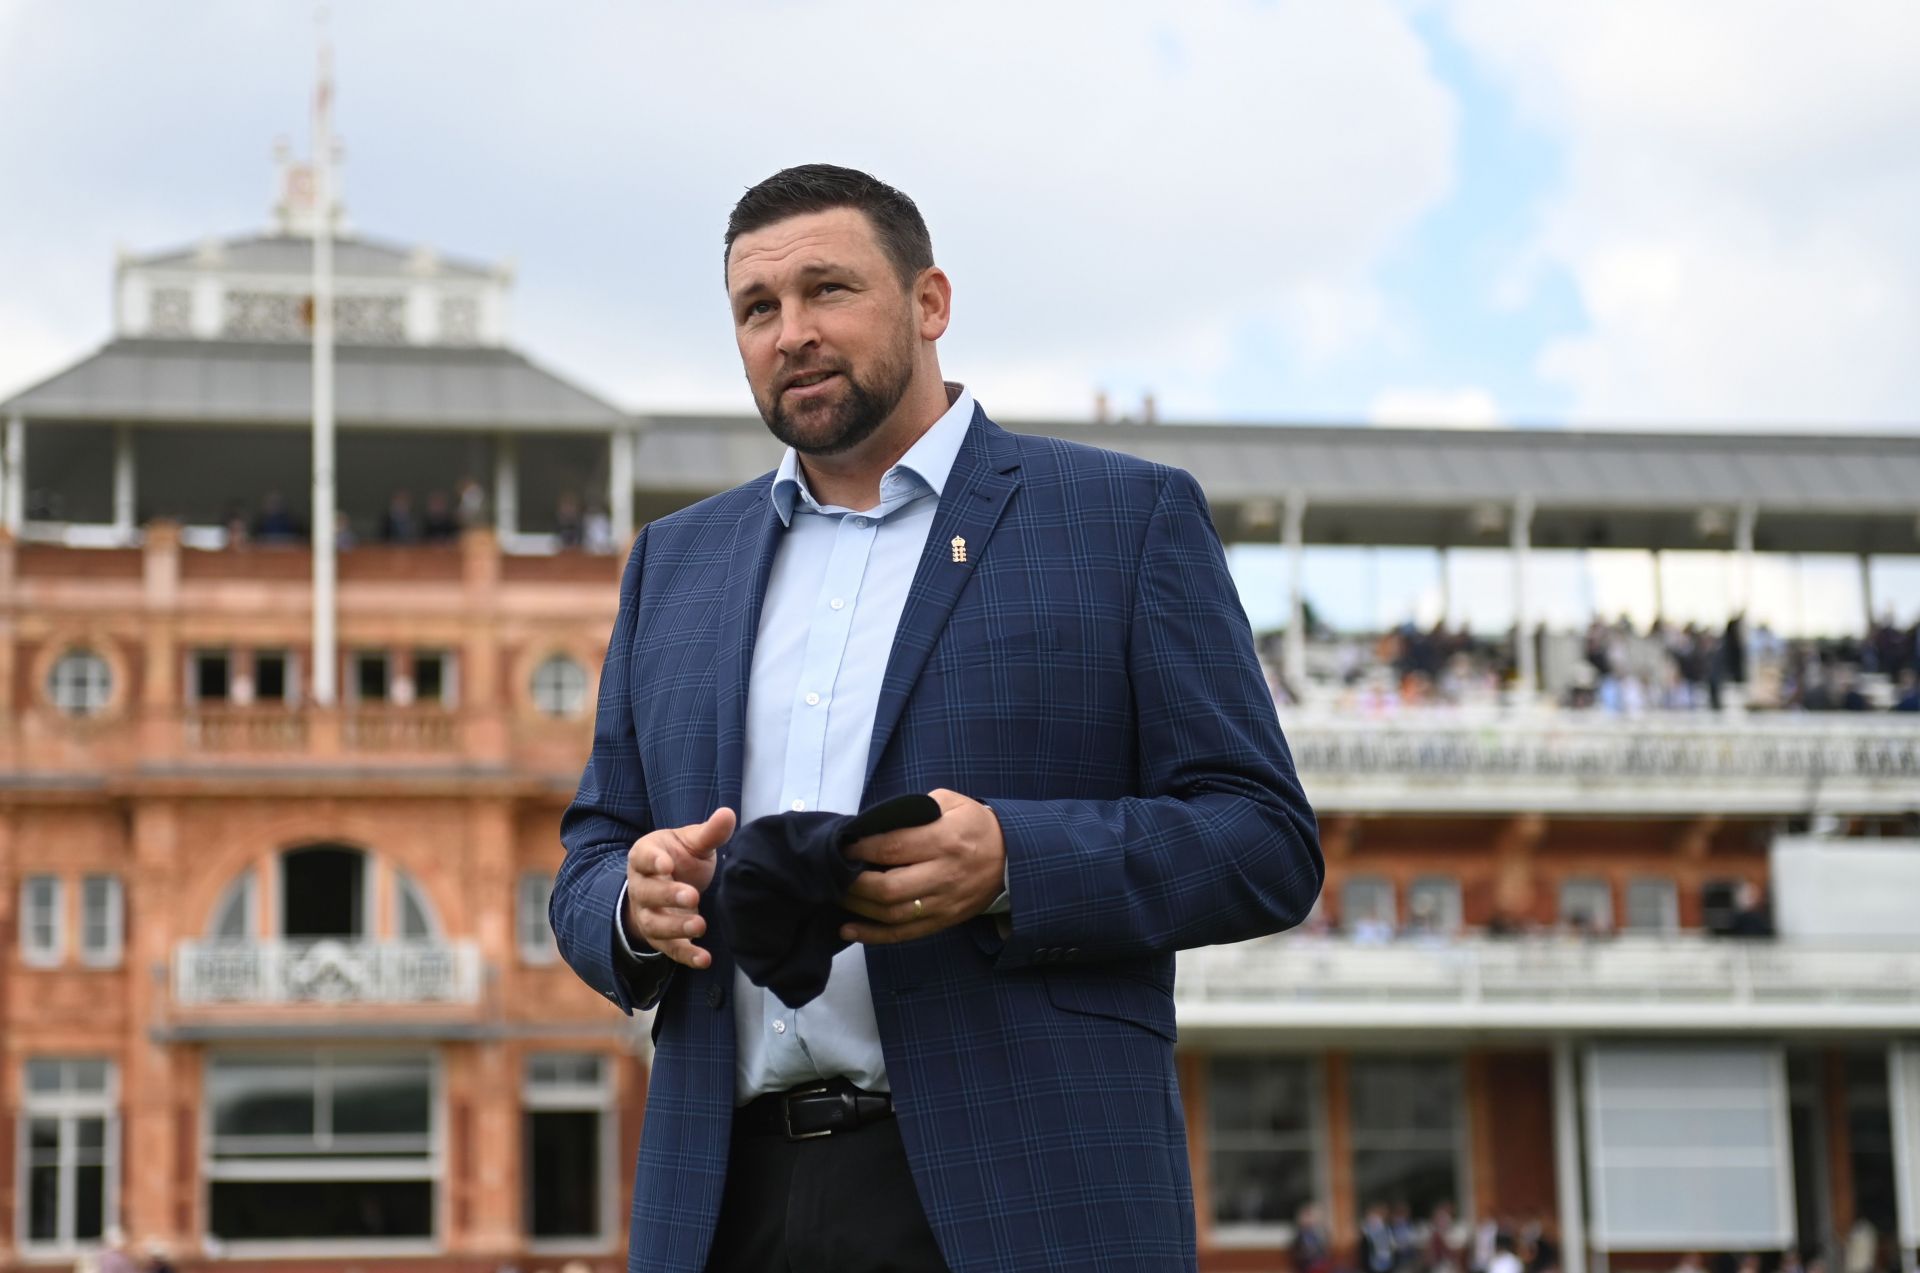 Steve Harmison has represented England in 63 Tests, 58 ODIs and 12 T20Is. (Image Credits: Getty)